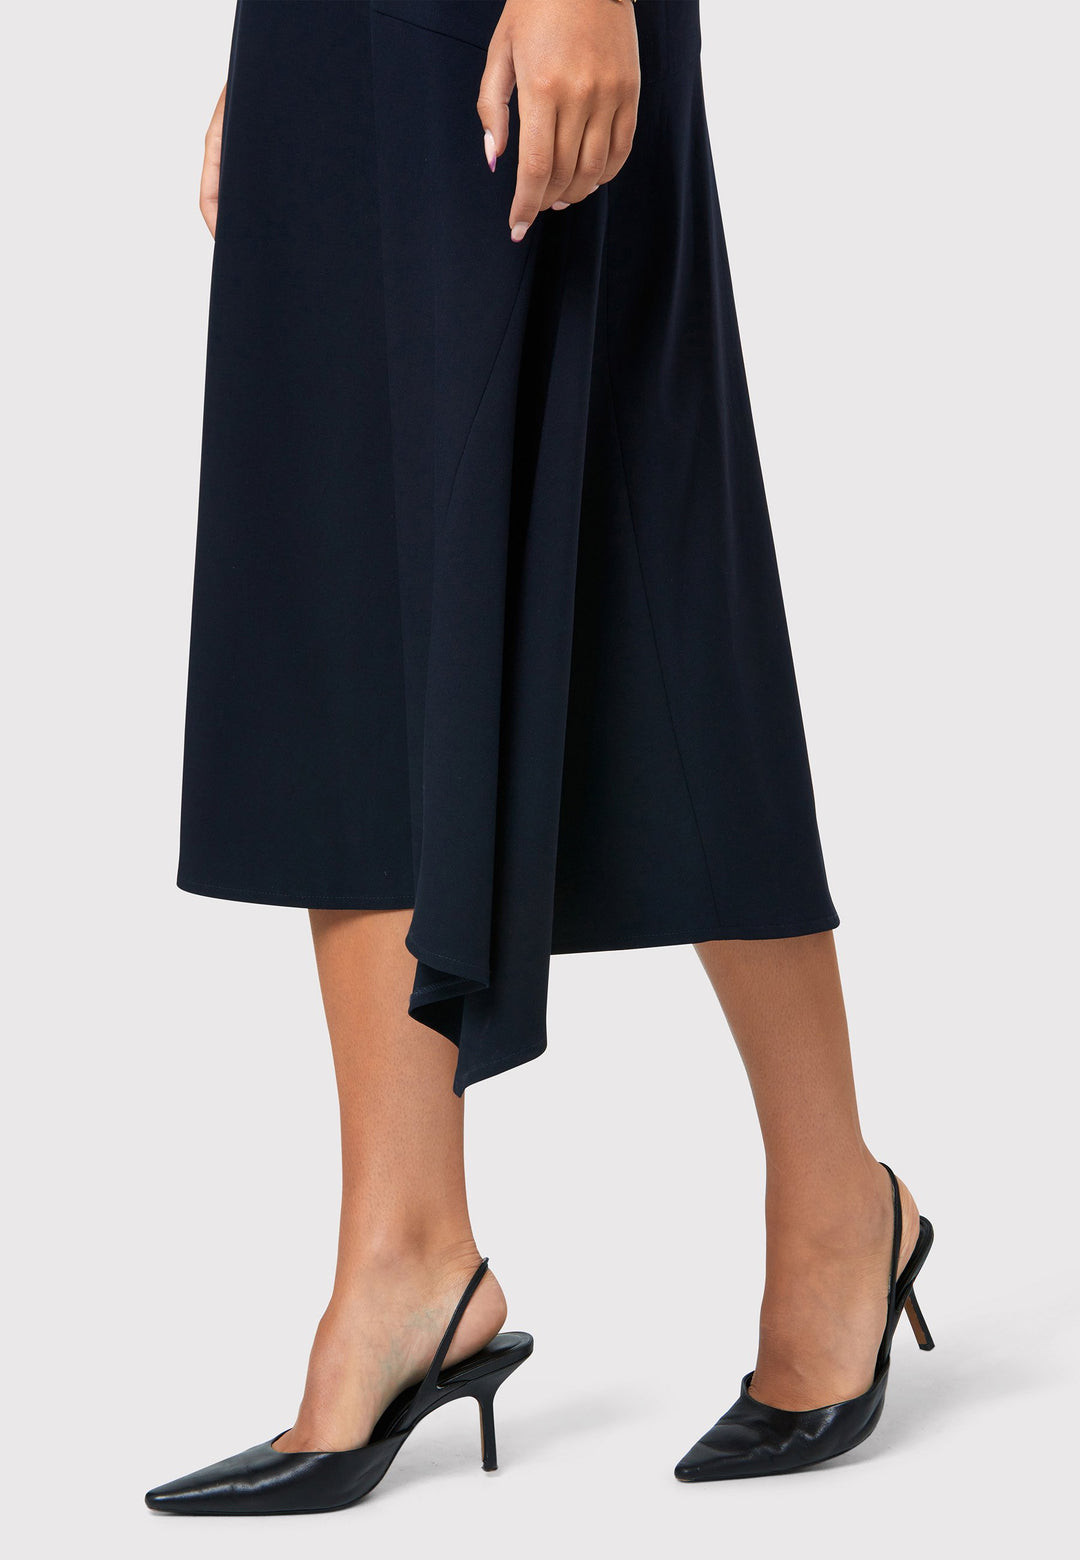 Step into elegance with the Odell Dark Navy Dress, a beautifully tailored and timeless piece. This dress features a detachable belt, fit and flare skirt, and an asymmetrical dipped hem. The wide V-neckline adds sophistication, while the hint of stretch ensures comfort and ease of movement. Whether you're attending a wedding, playing the role of the mother of the bride, or heading to the races, the Odell Dark Navy Dress is the perfect choice for a memorable occasion.